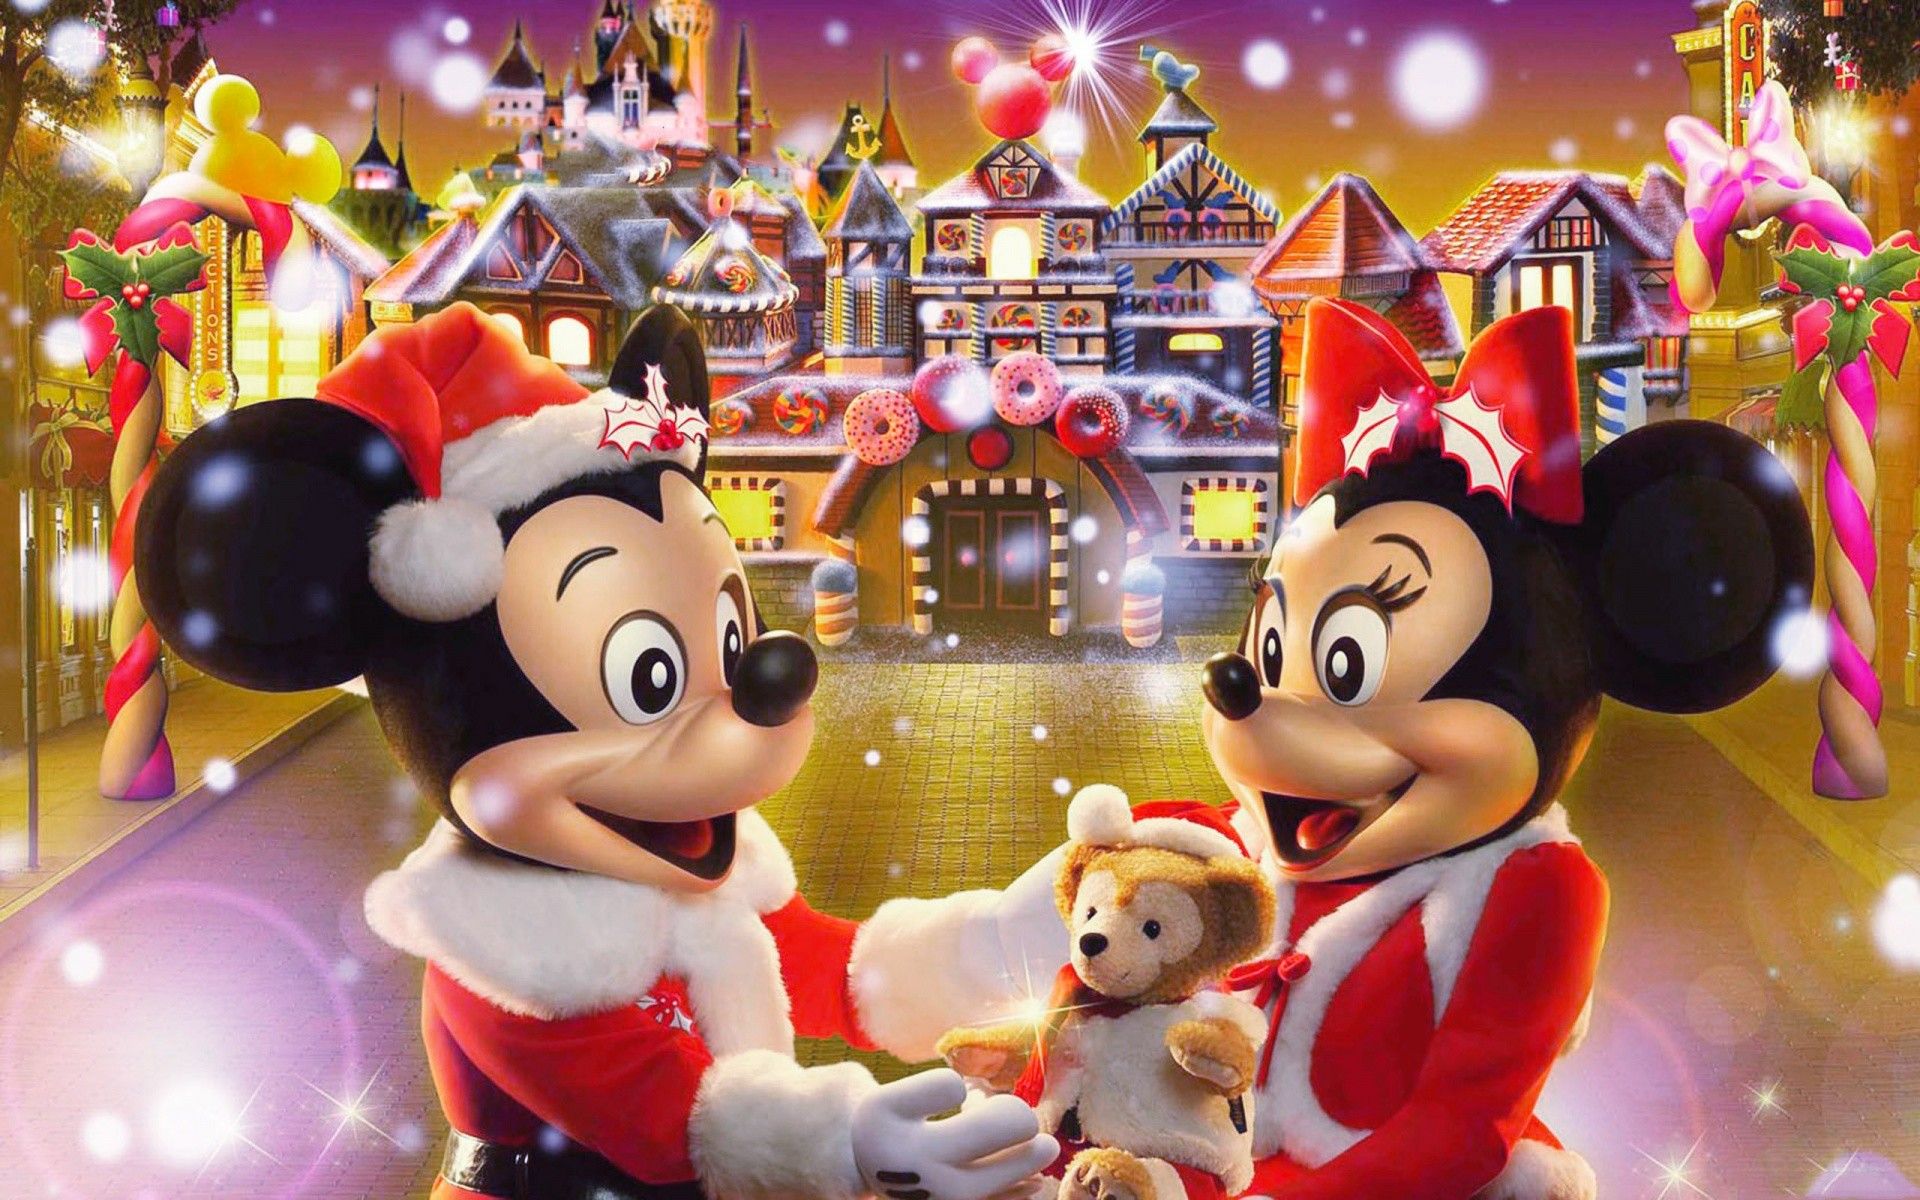 Mickey Mouse Christmas Background